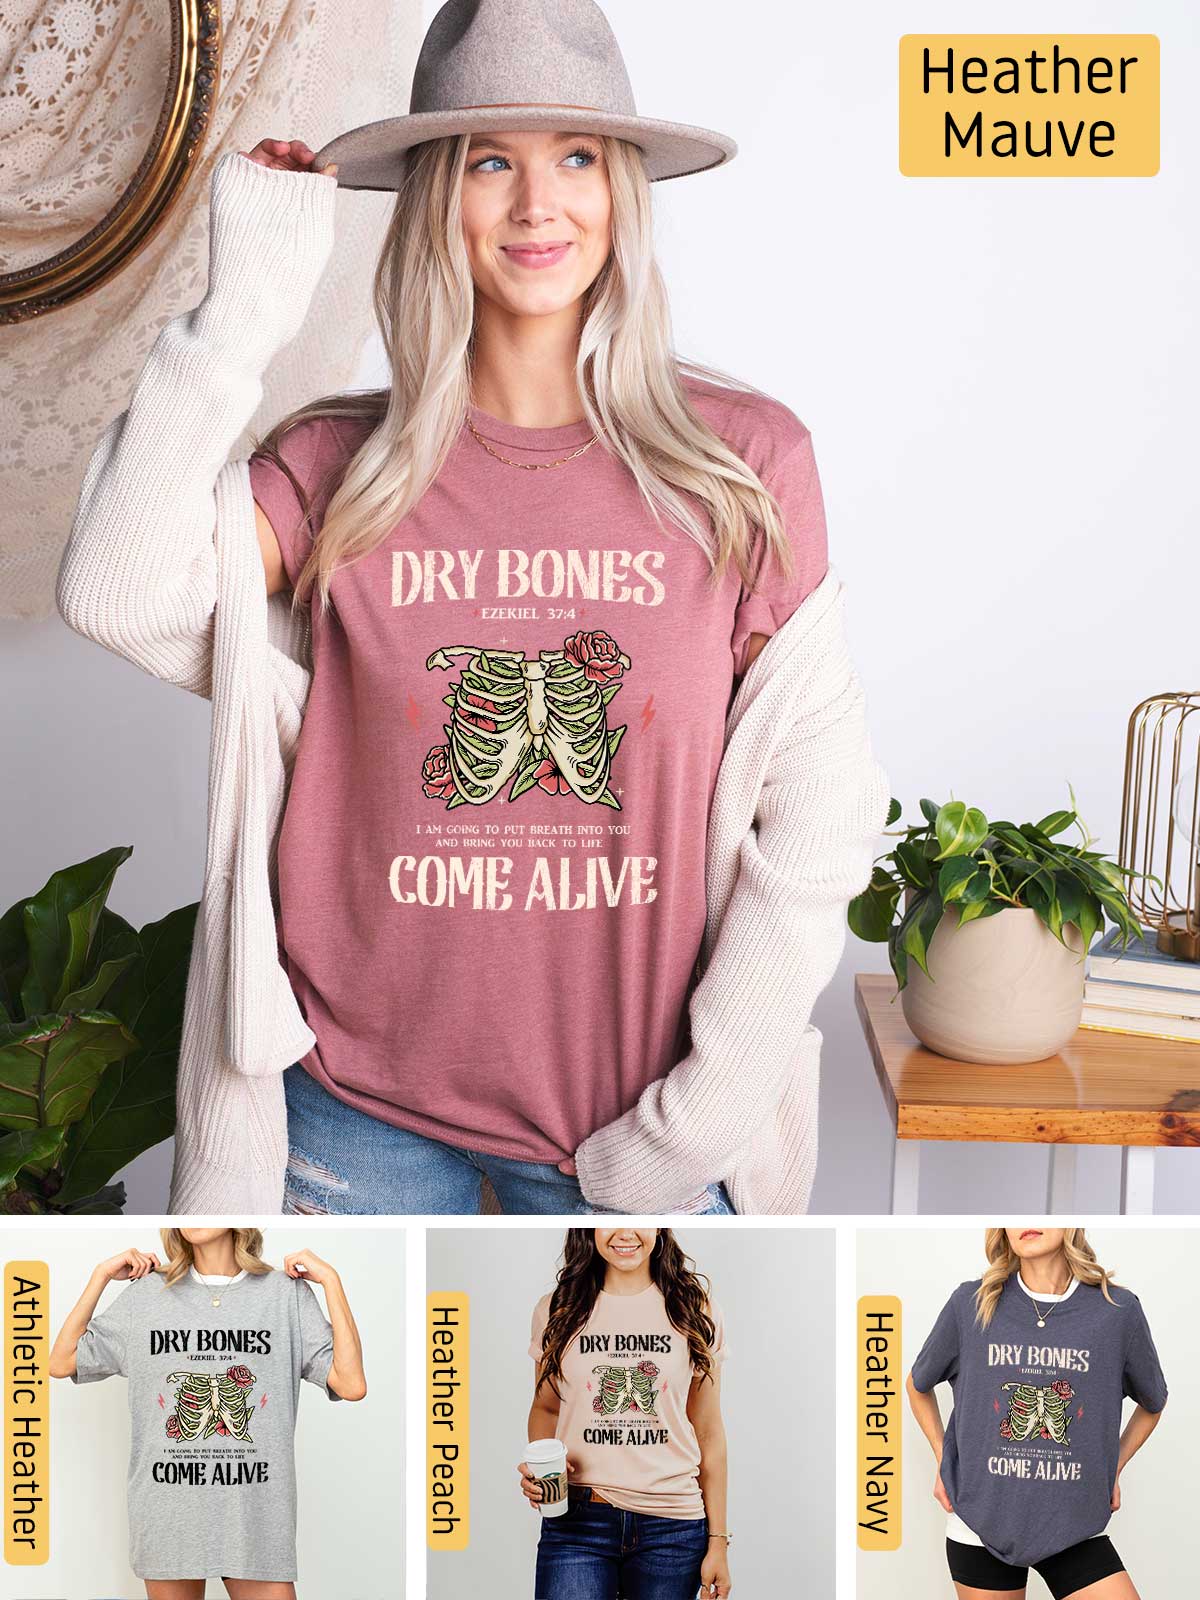 a woman wearing a hat and a t - shirt that says dry bones come alive